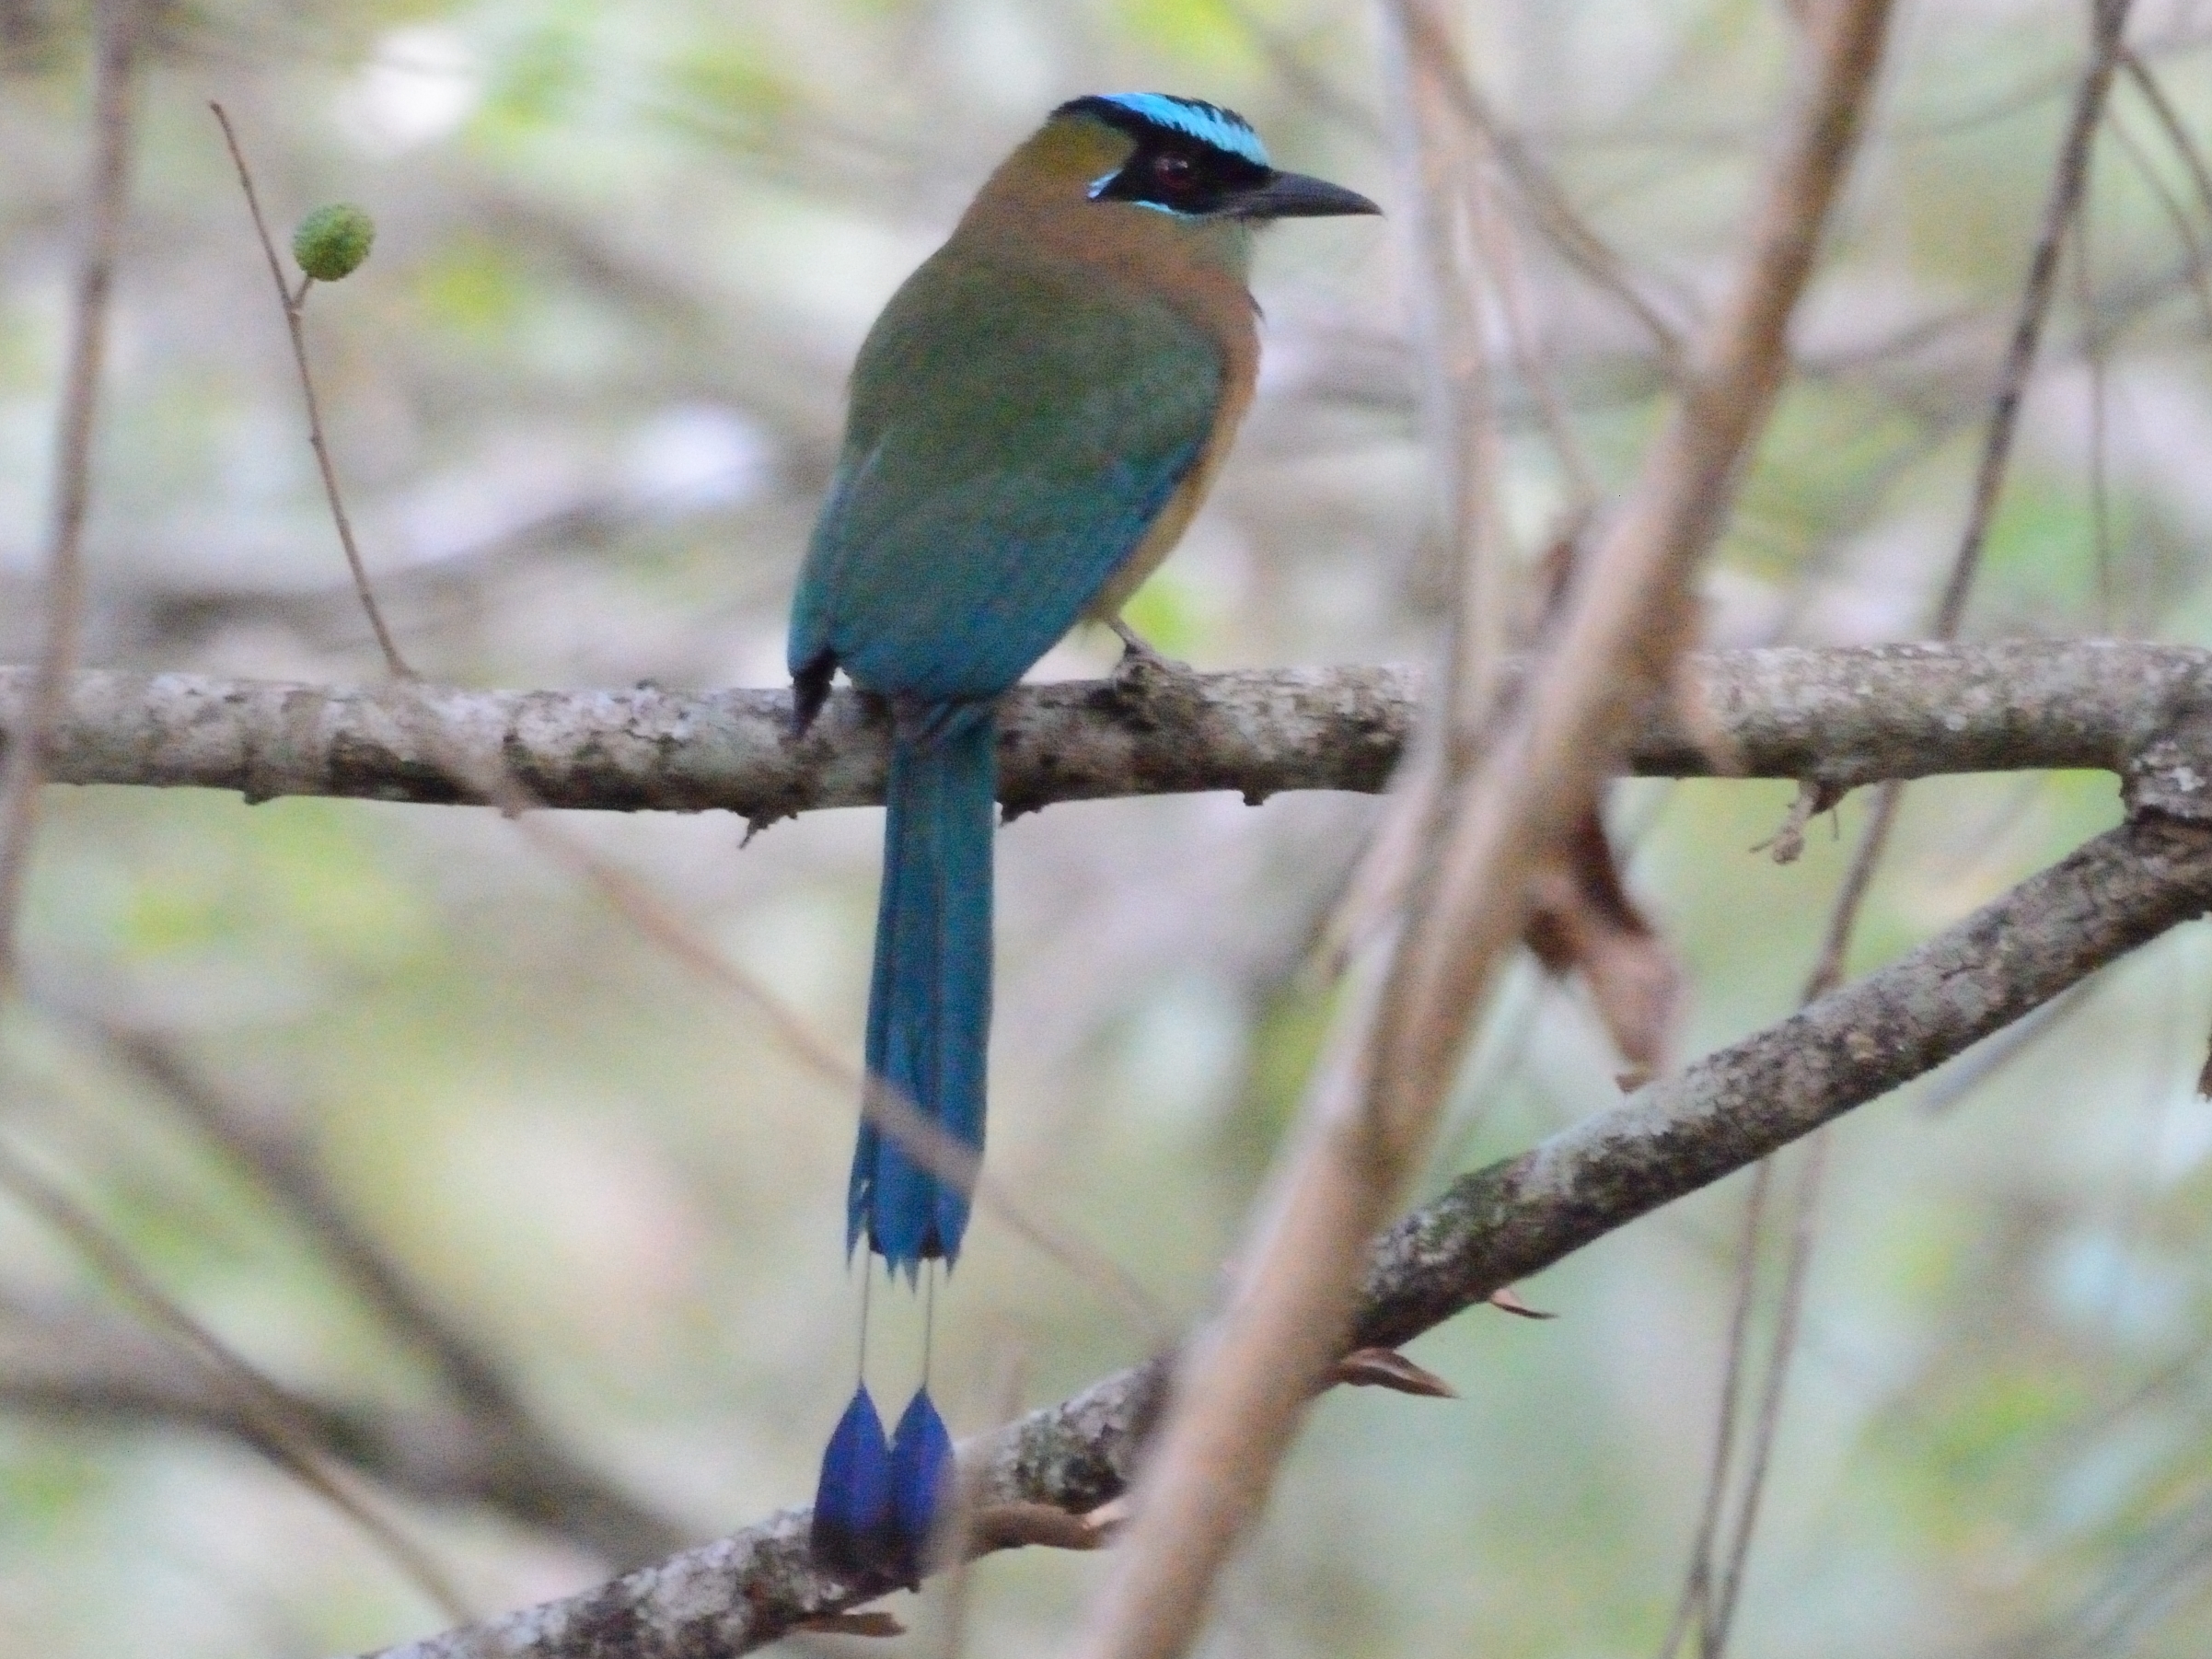 Click picture to see more Blue-crowned Motmots.